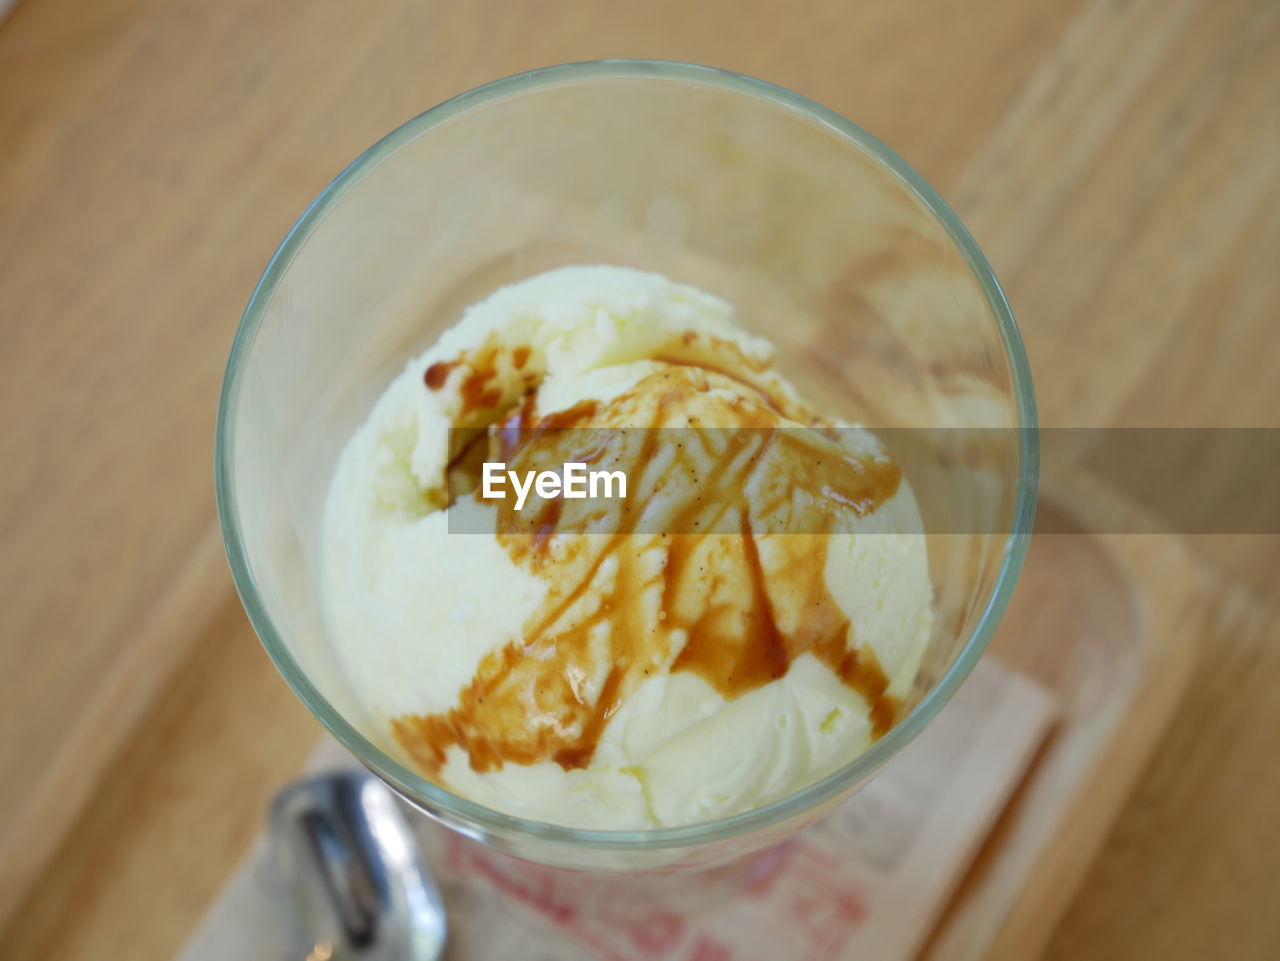 CLOSE-UP OF ICE CREAM IN GLASS ON TABLE